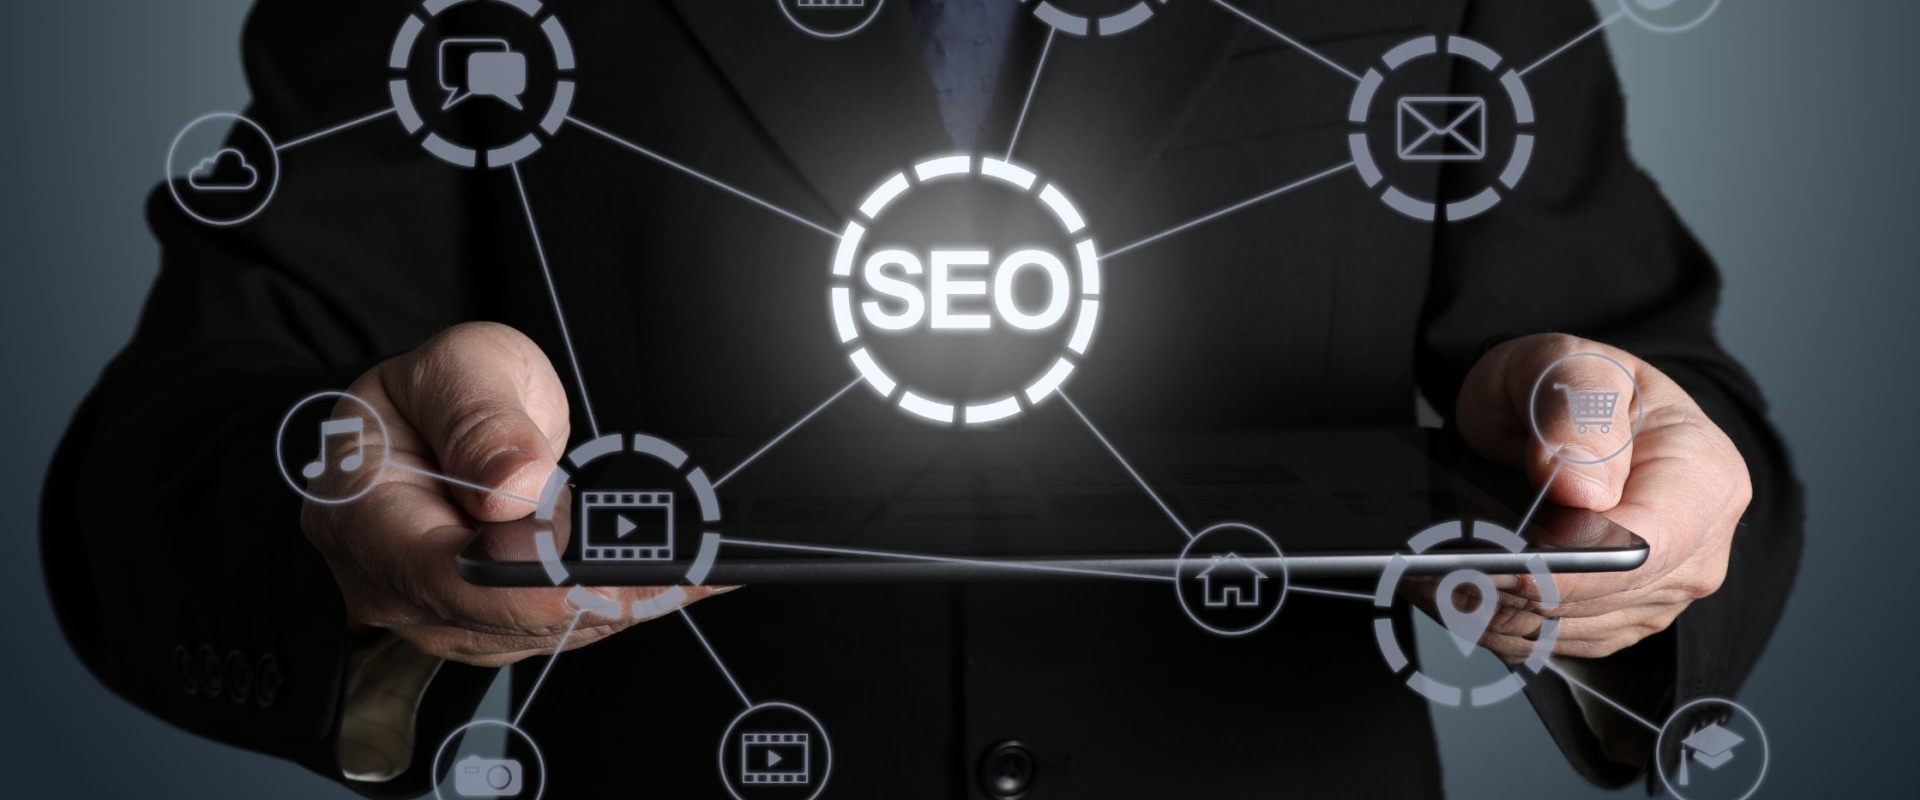 How do you optimize your content for seo?